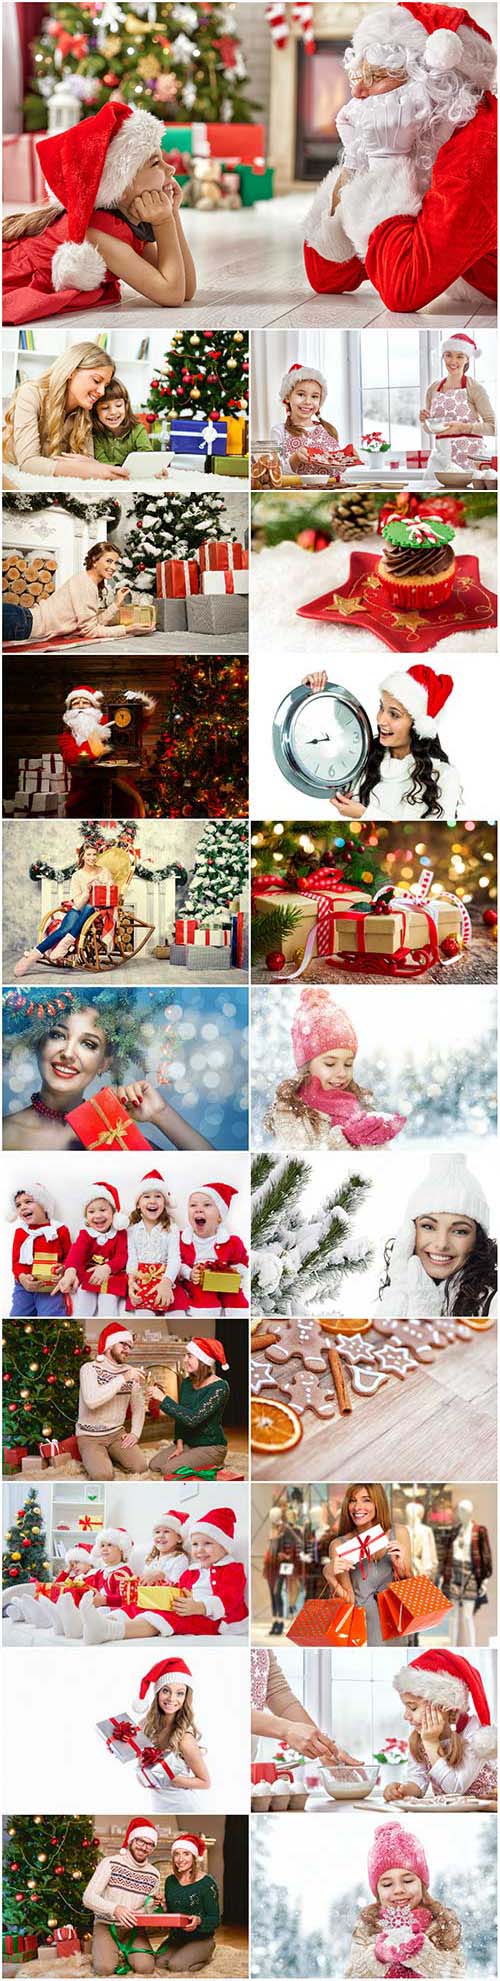 New Year and Christmas stock photos 91